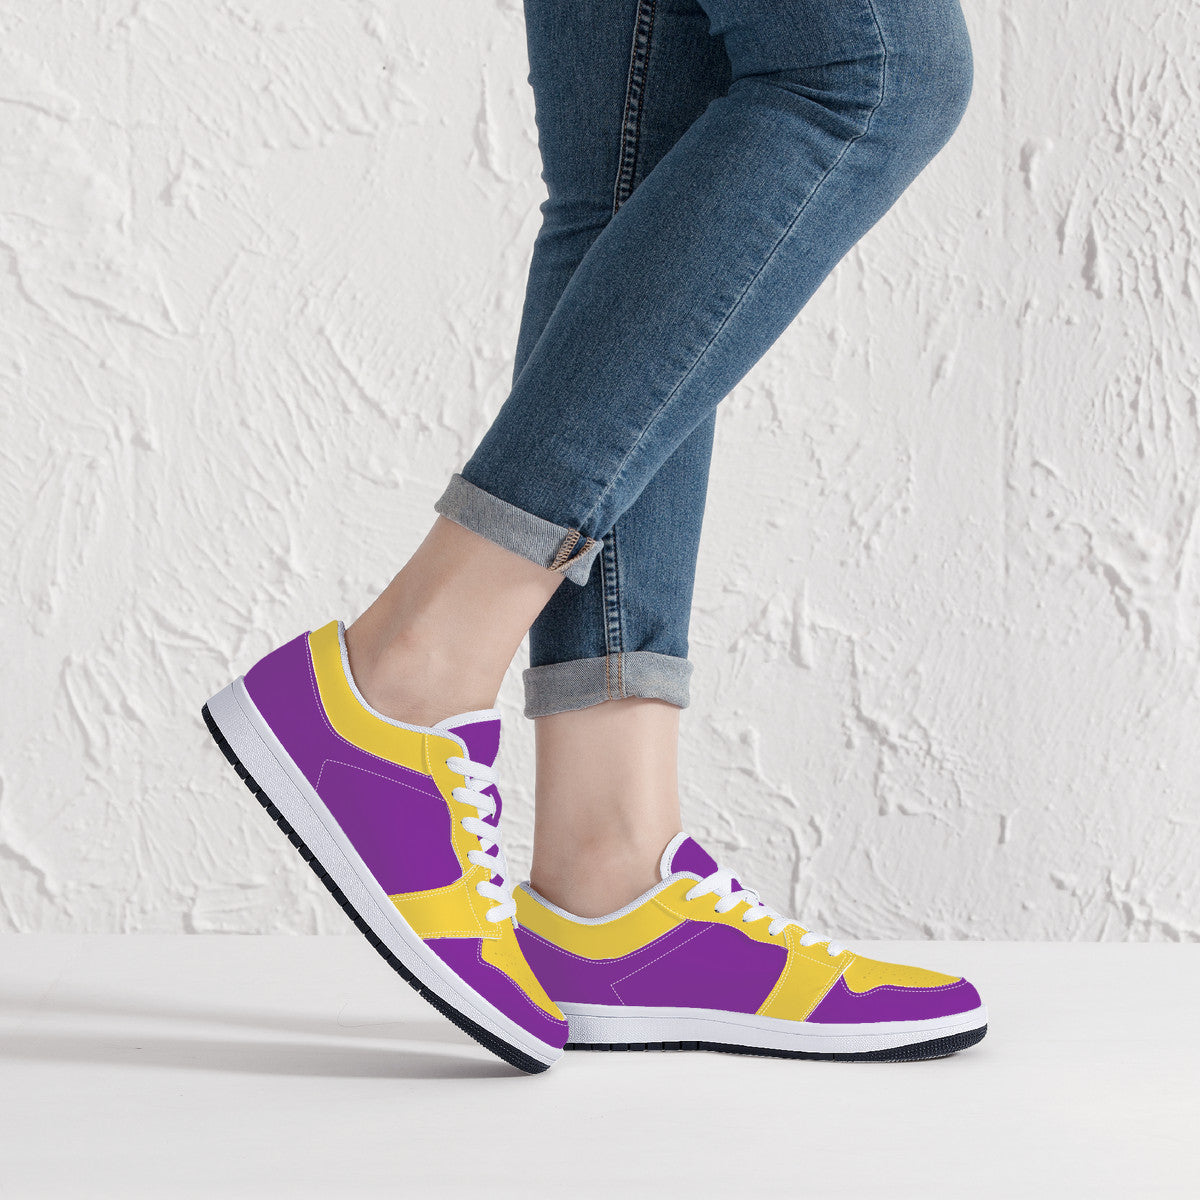 Leather Sneakers - Purple / Yellow Trim